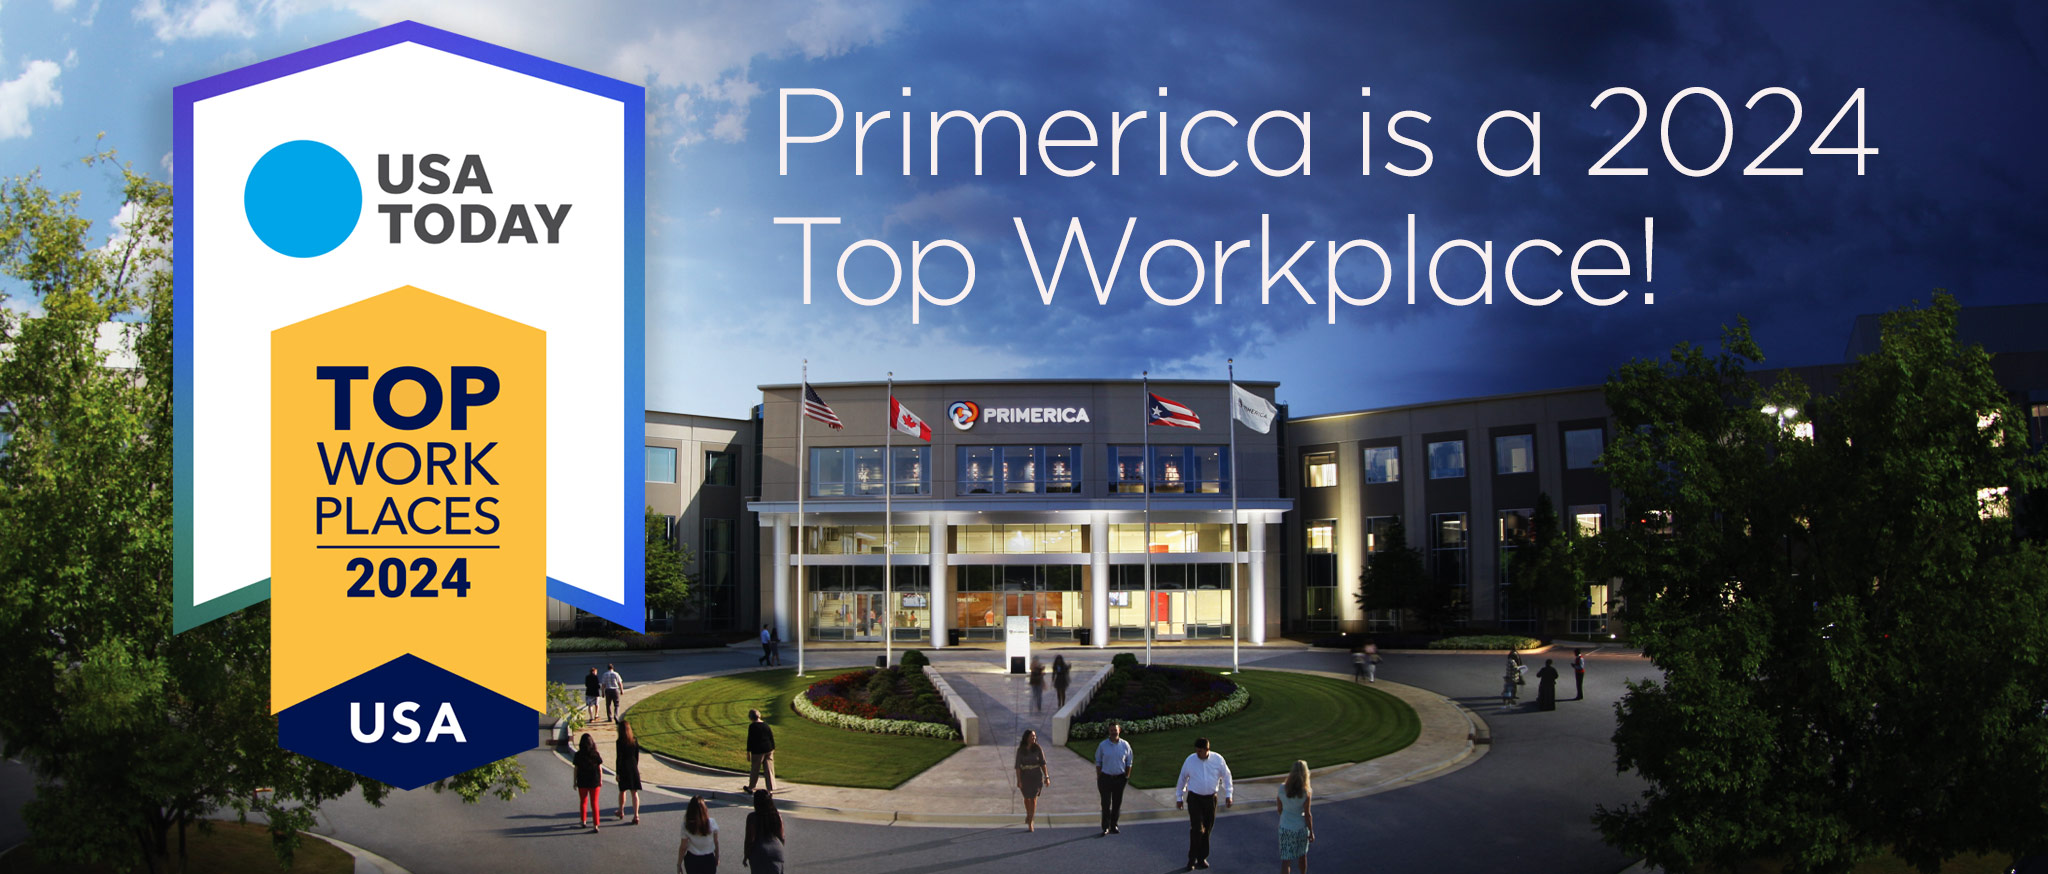 USA Today 2024 Top Workplace 